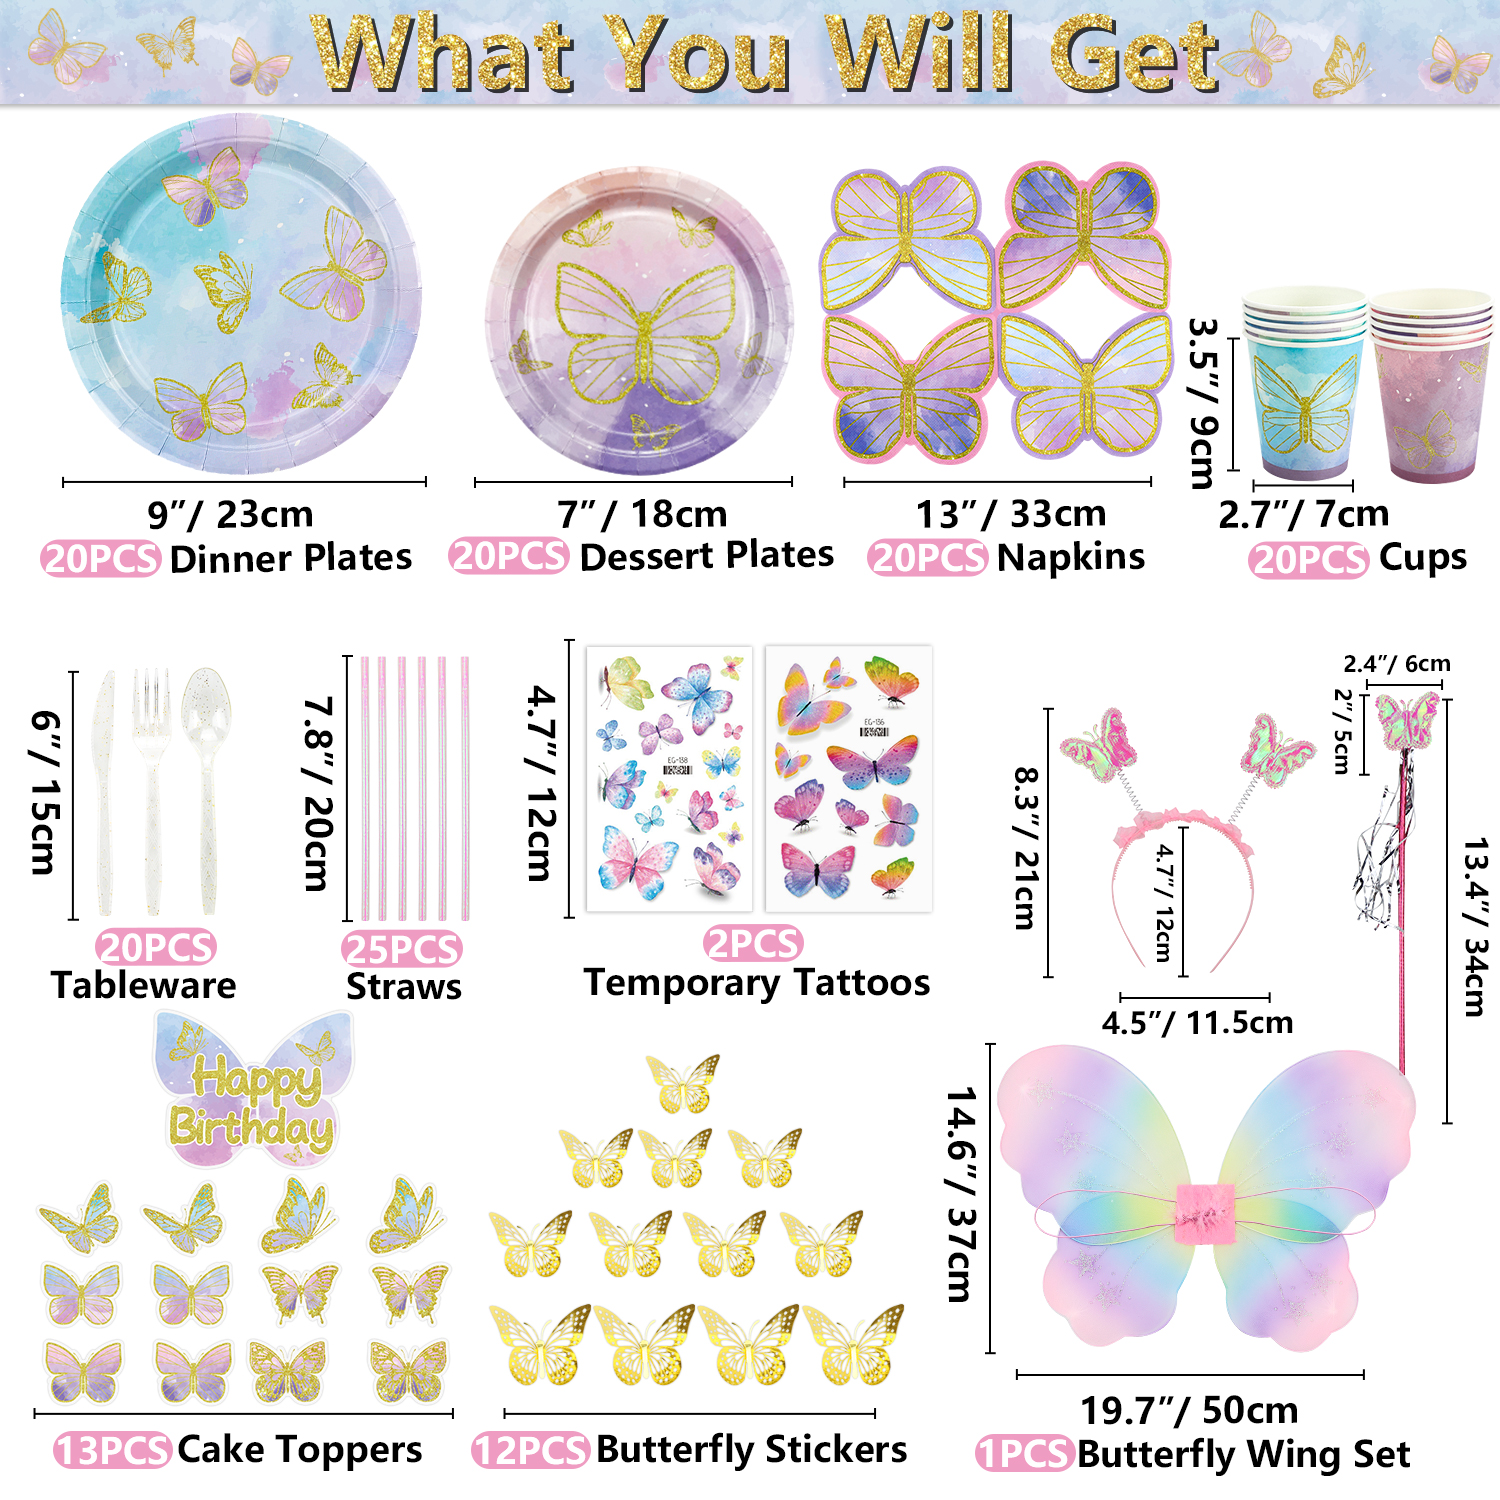 256 Pcs Butterfly Party Decorations - Including Plates, Tablecloth, Balloons, Banner, Butterfly Stickers, Cups, Butterfly Wing Set for Butterfly Birthday Decorations, Fairy Party Supplies - image 2 of 7